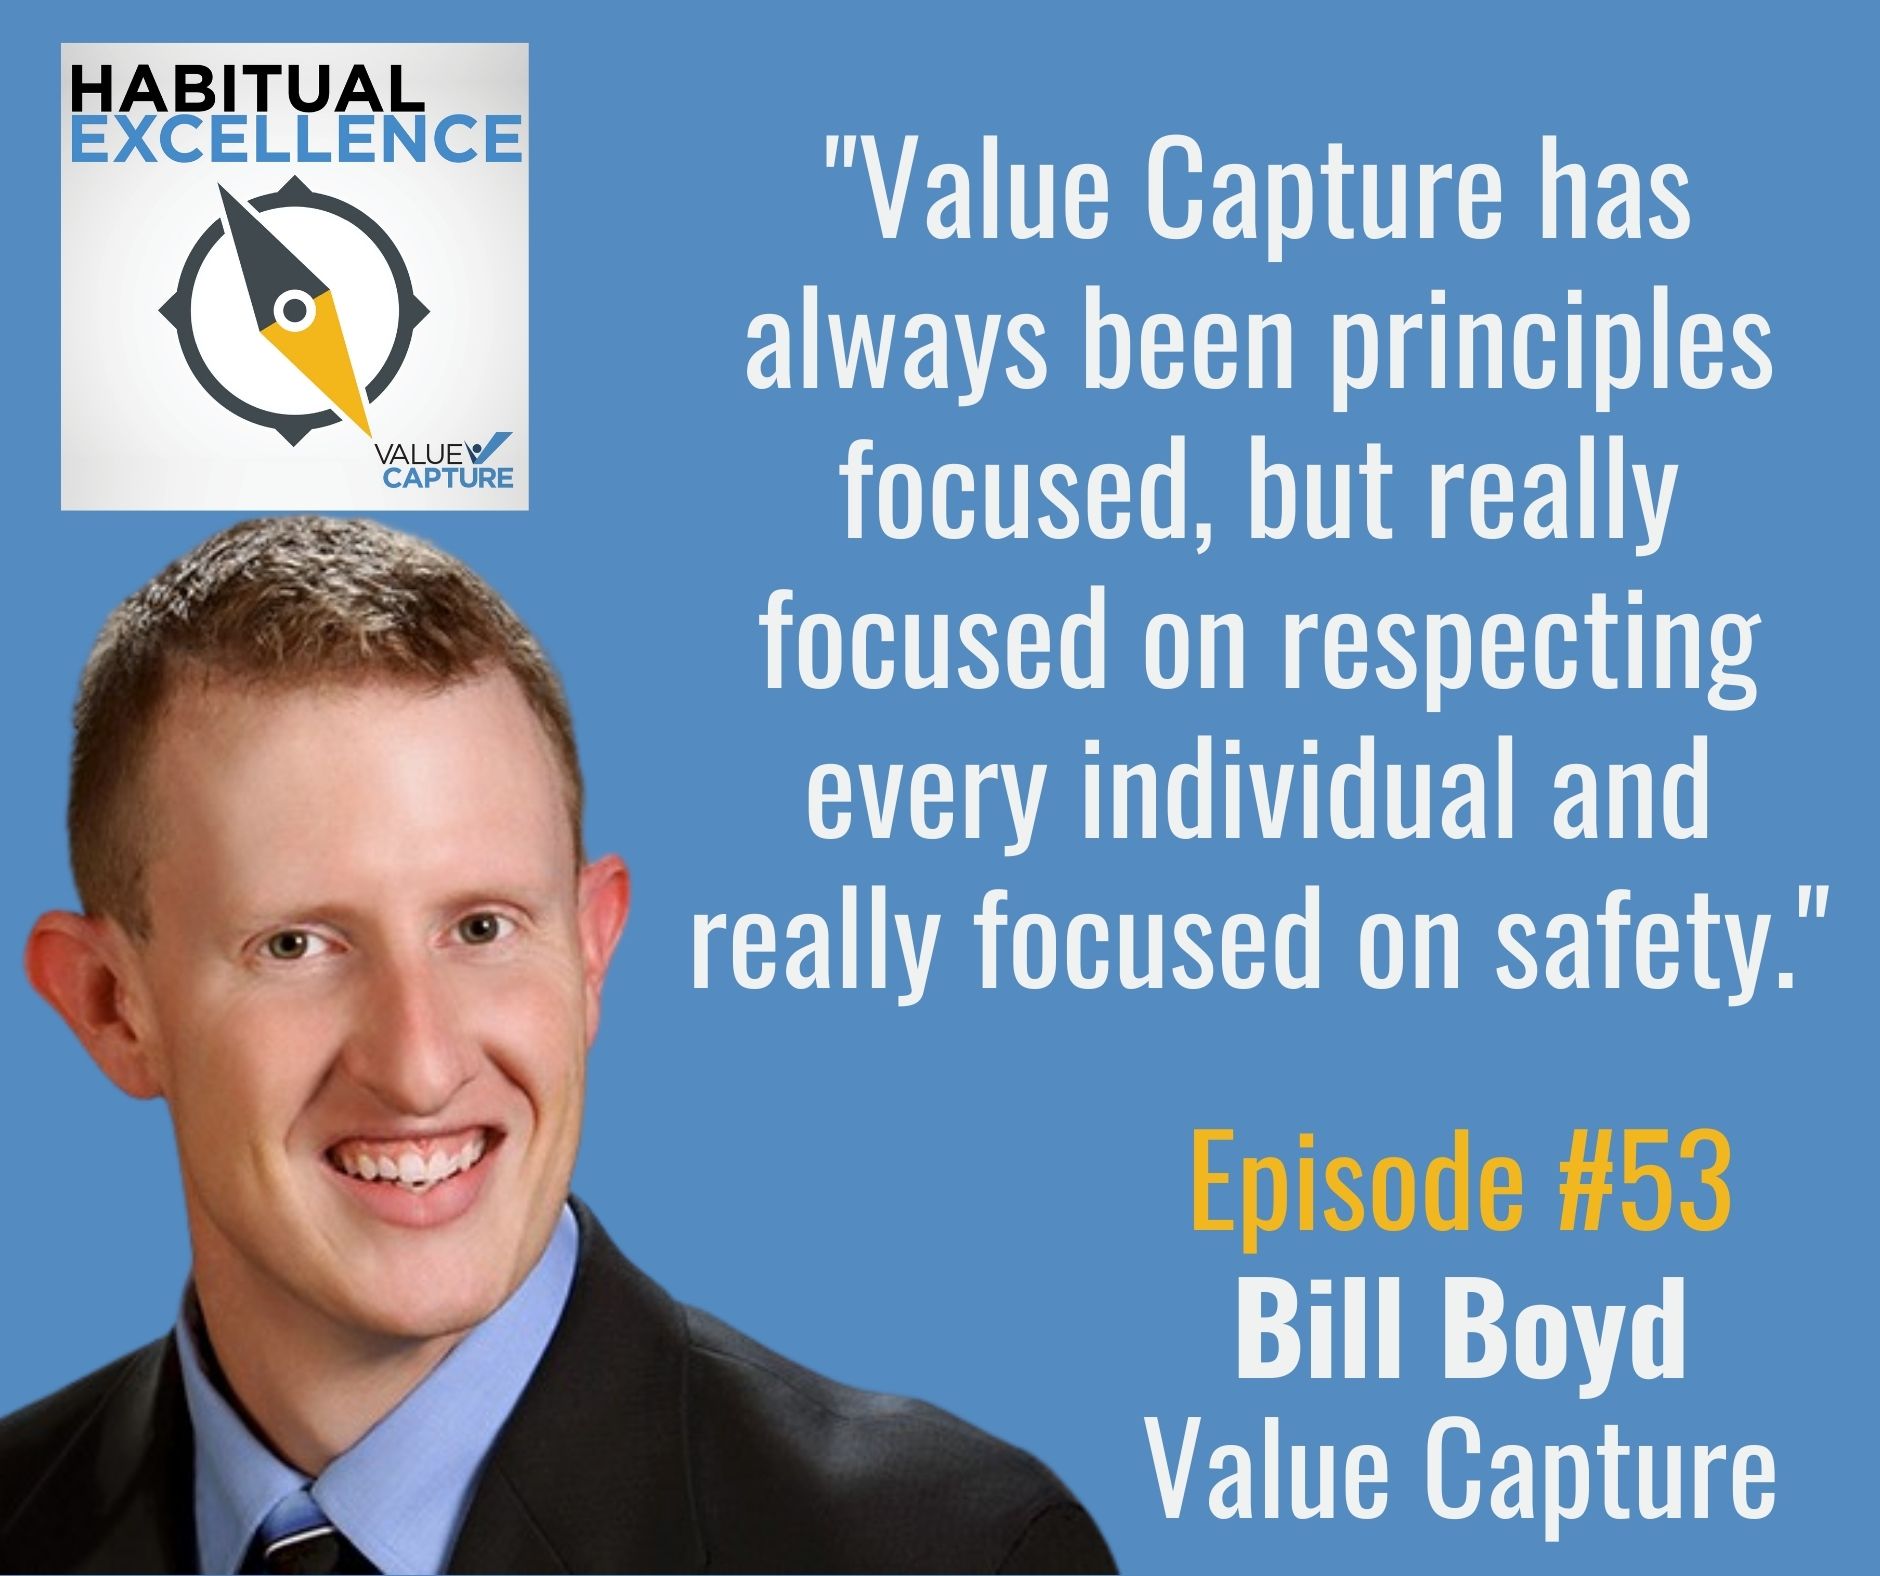 "Value Capture has always been principles focused, but really focused on respecting every individual and really focused on safety." Bill Boyd